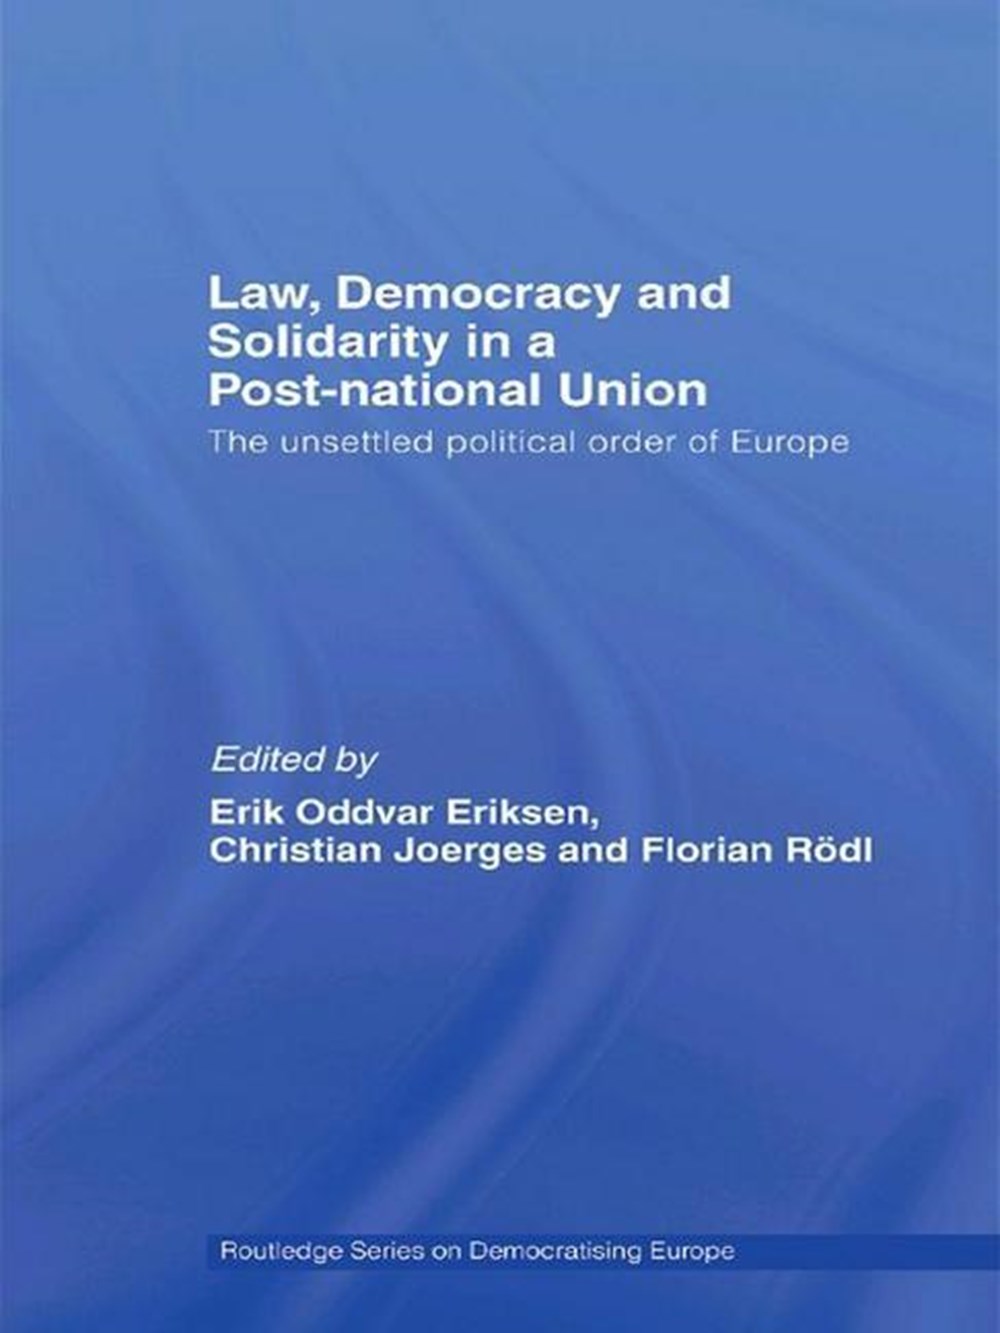 Law, Democracy and Solidarity in a Post-national Union: The unsettled political order of Europe